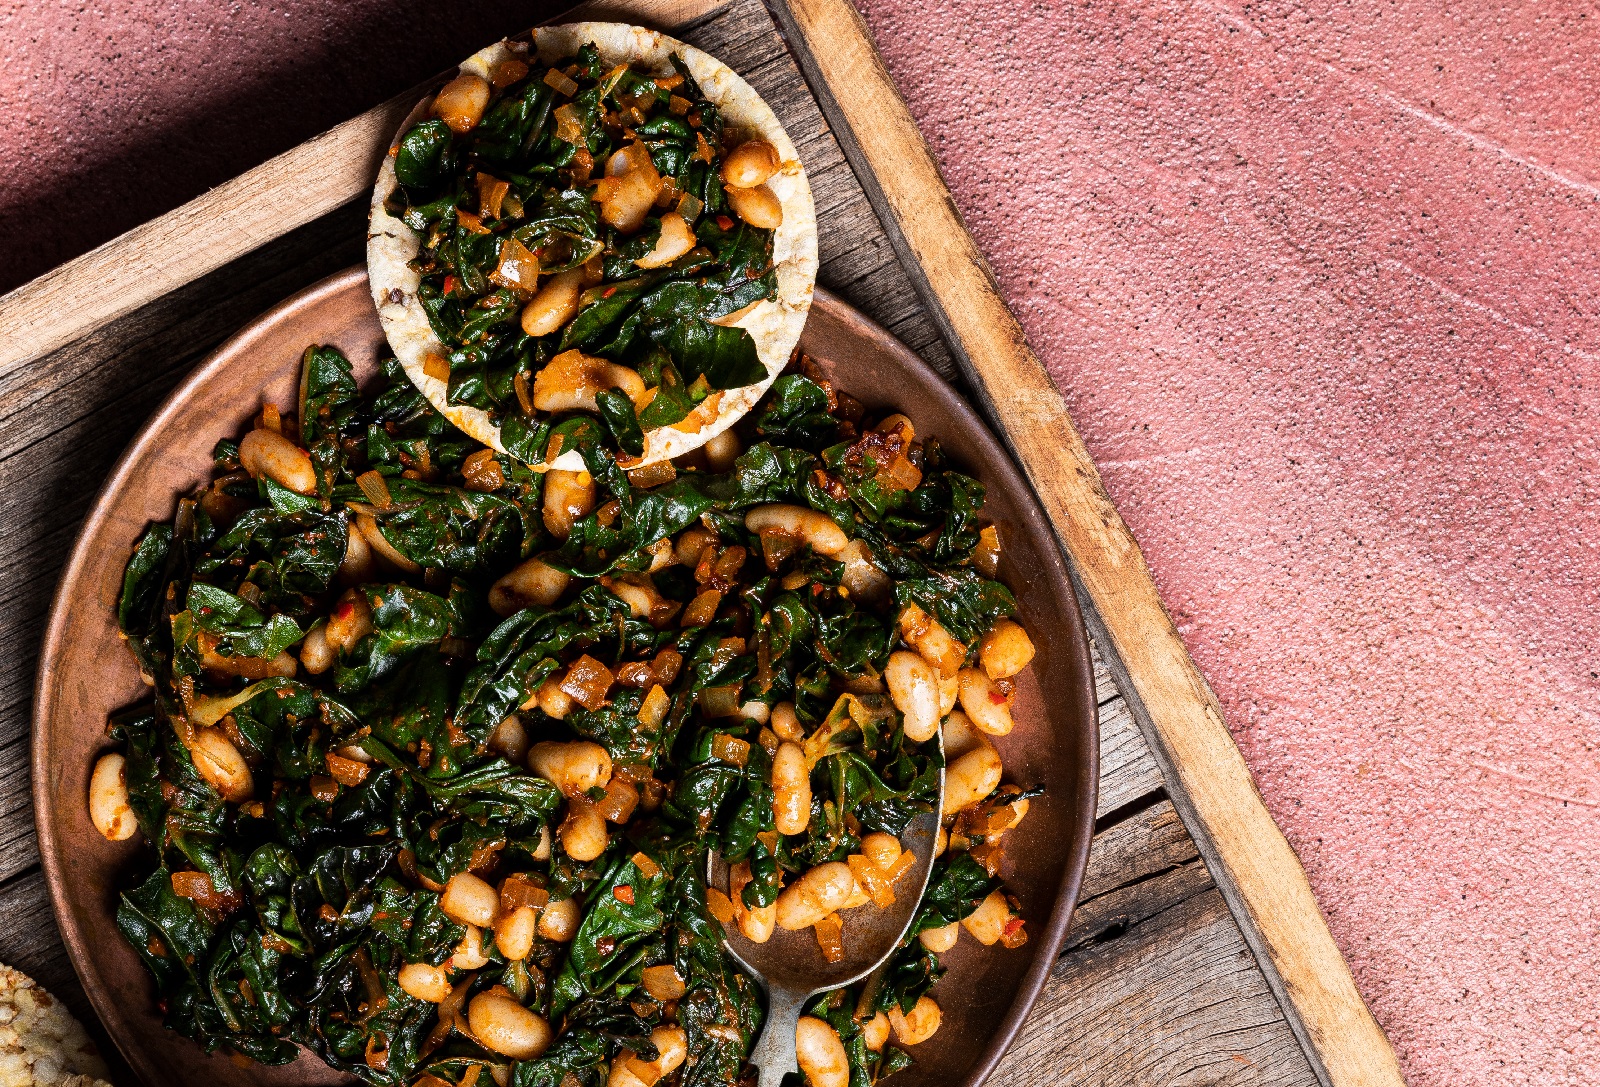 Moroccan Spiced Silverbeet & White Beans on Corn Thins slices